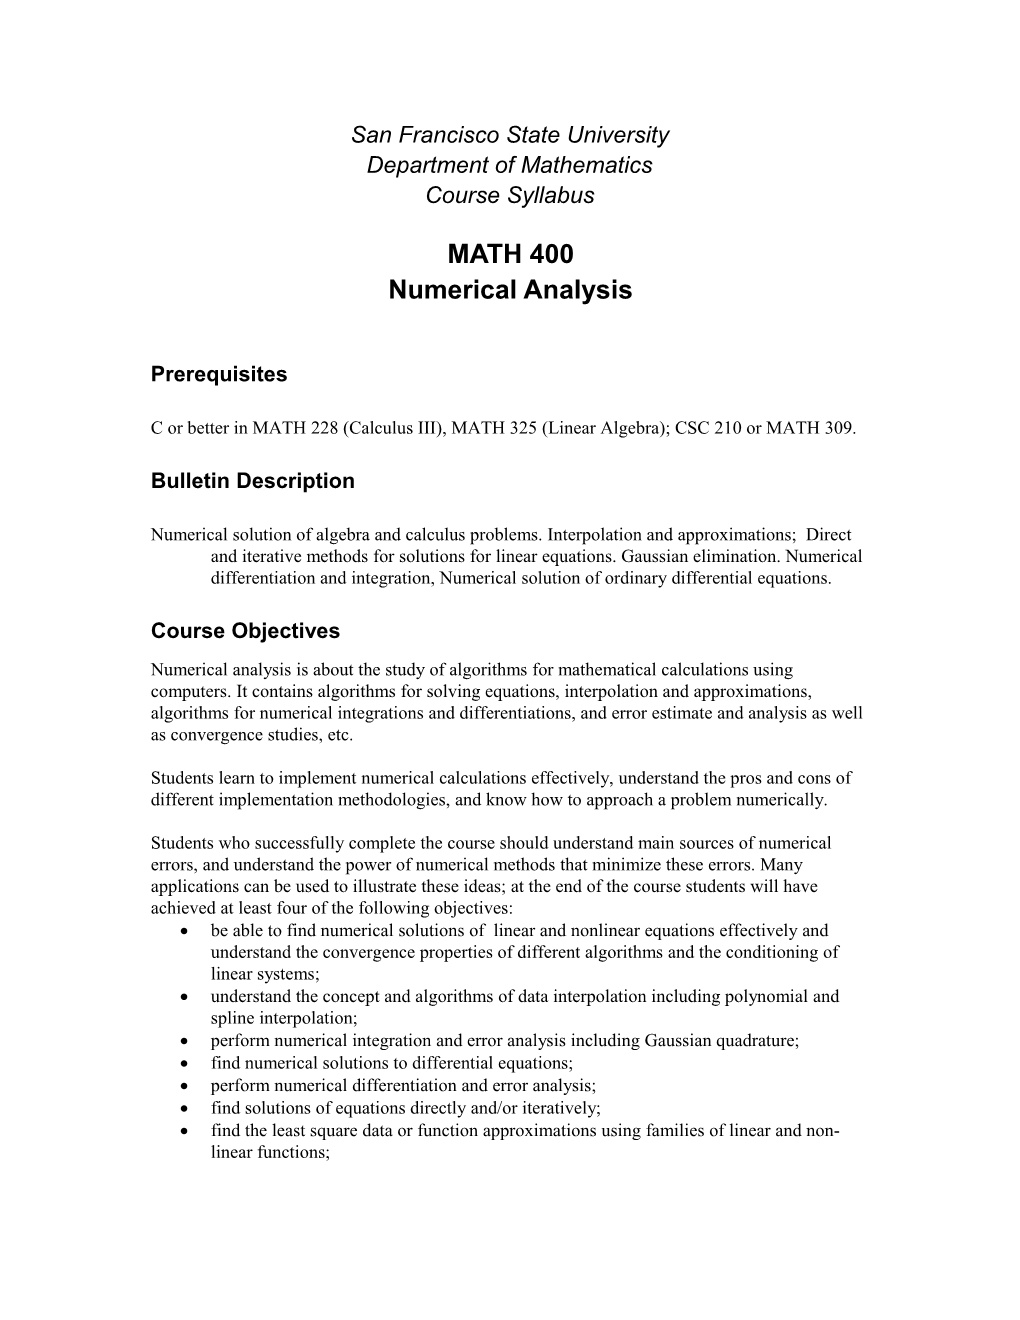 Please Use This Template for SFSU Math Department Course Descriptions